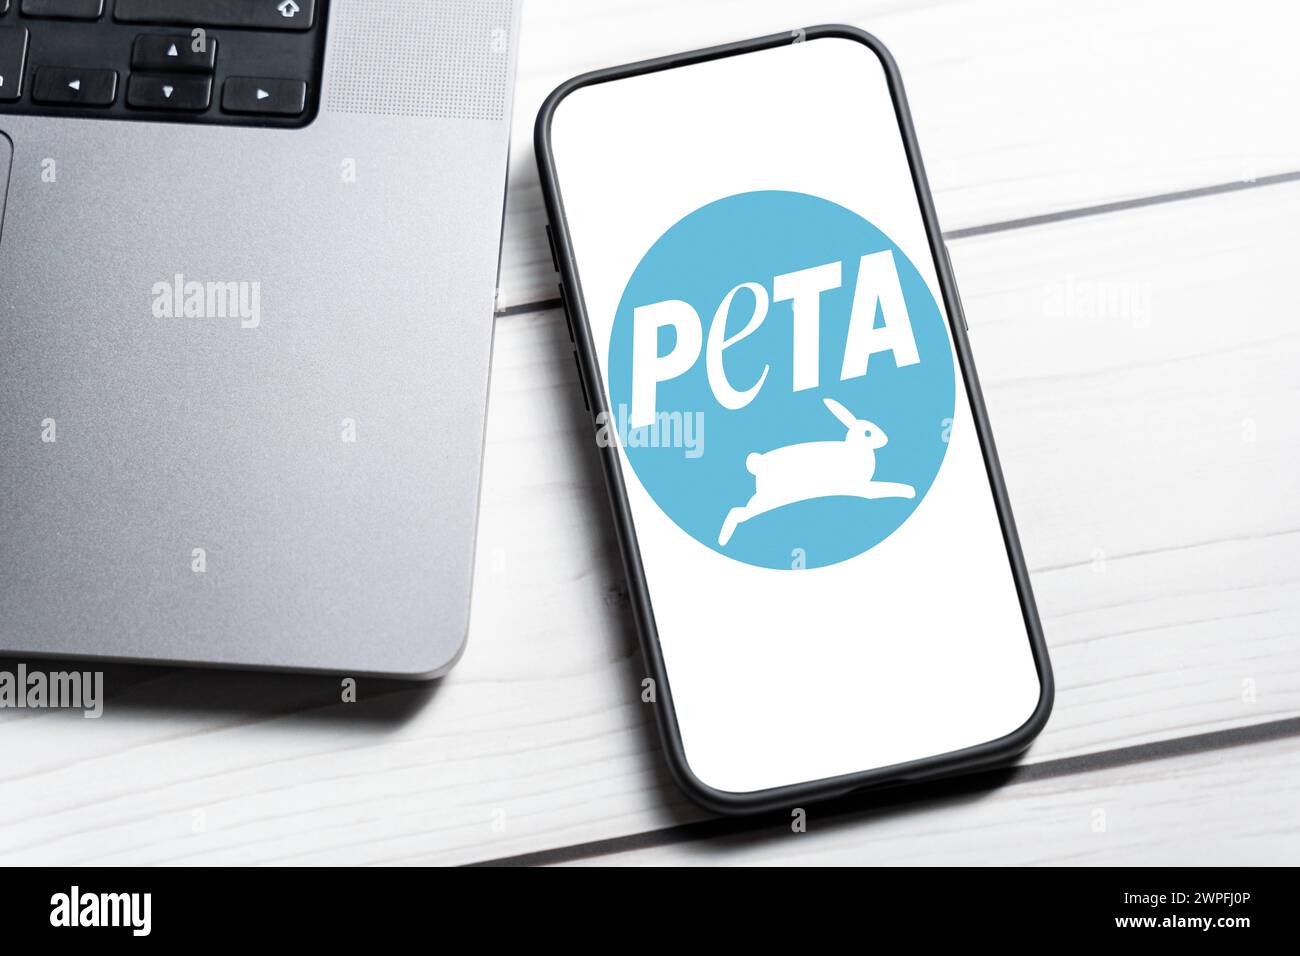 Germany - 7 March 2024: Mobile phone lying on a table with the logo of the animal welfare organization Peta - People for the Ethical Treatment of Animals. PHOTOMONTAGE *** Handy liegt auf einem Tisch, auf dem das Logo der Tierschutzorganisation Peta - People for the Ethical Treatment of Animals zu sehen ist. FOTOMONTAGE Stock Photo